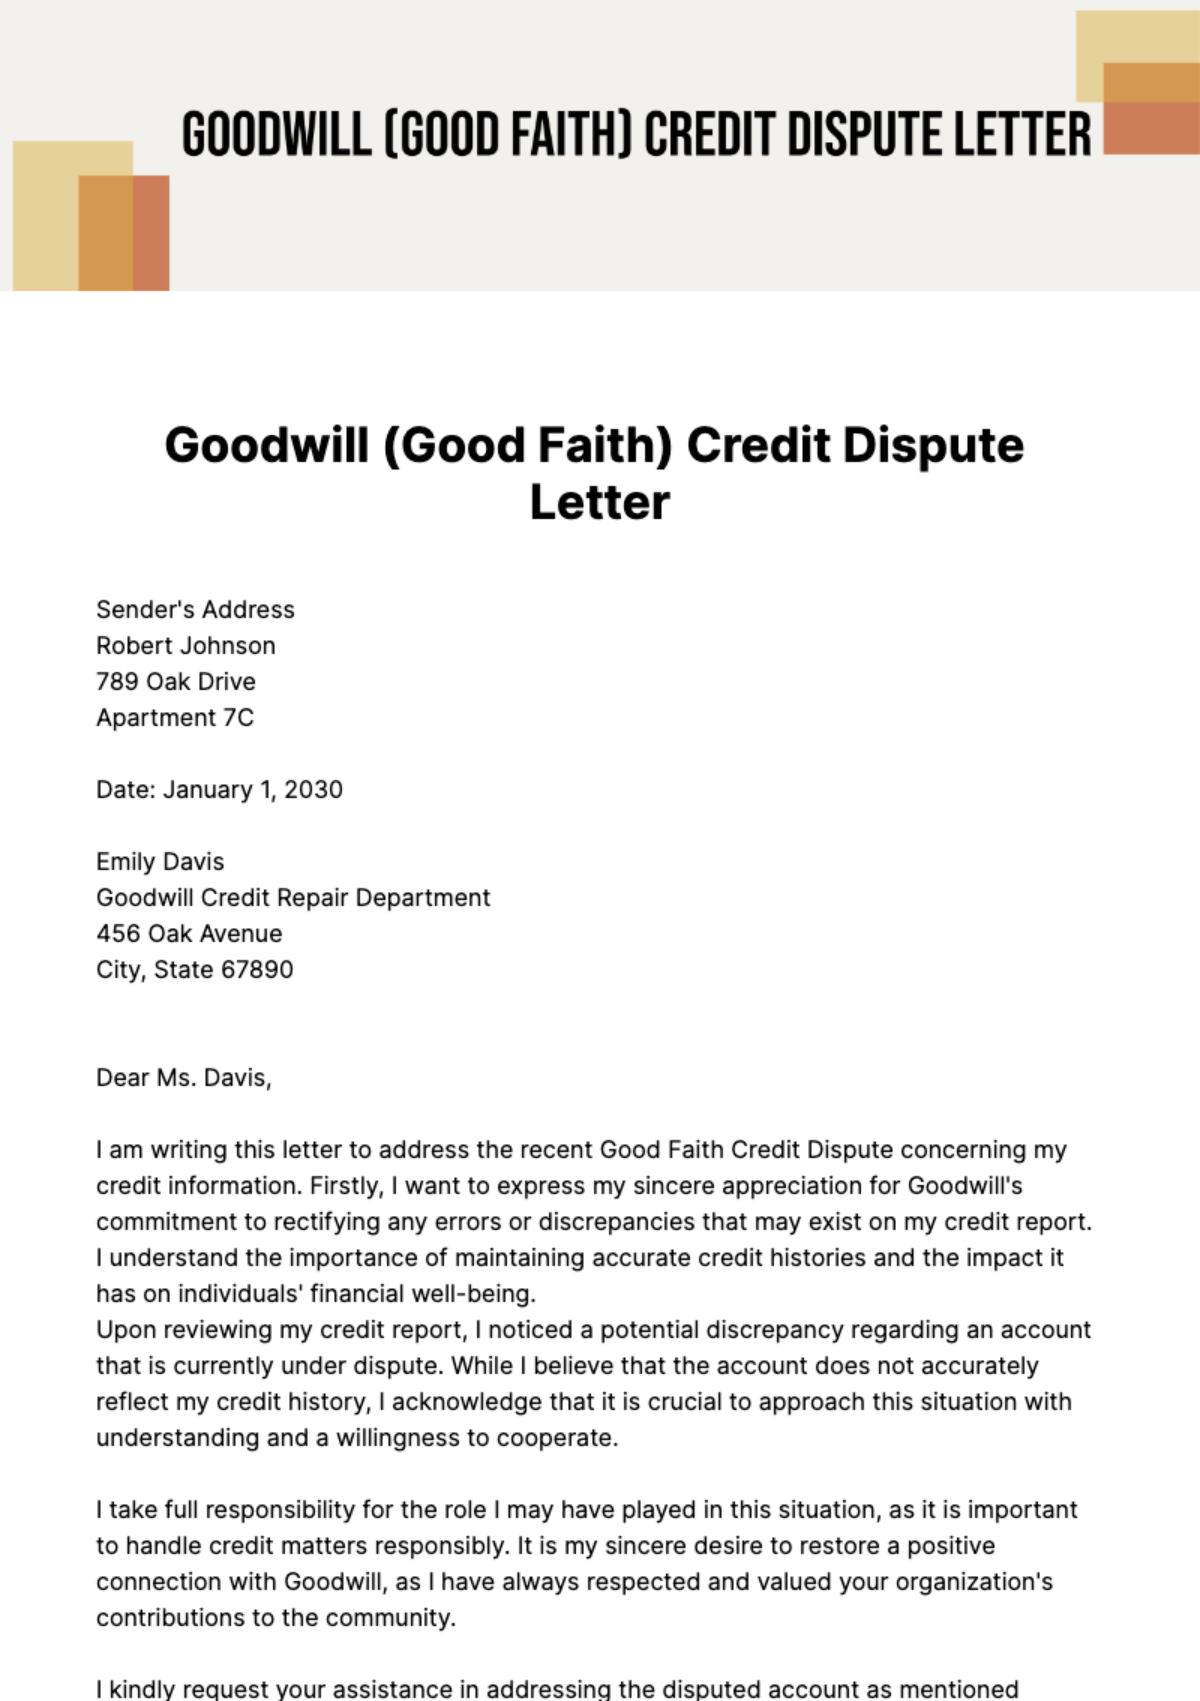 Free Goodwill (Good Faith) Credit Dispute Letter Template